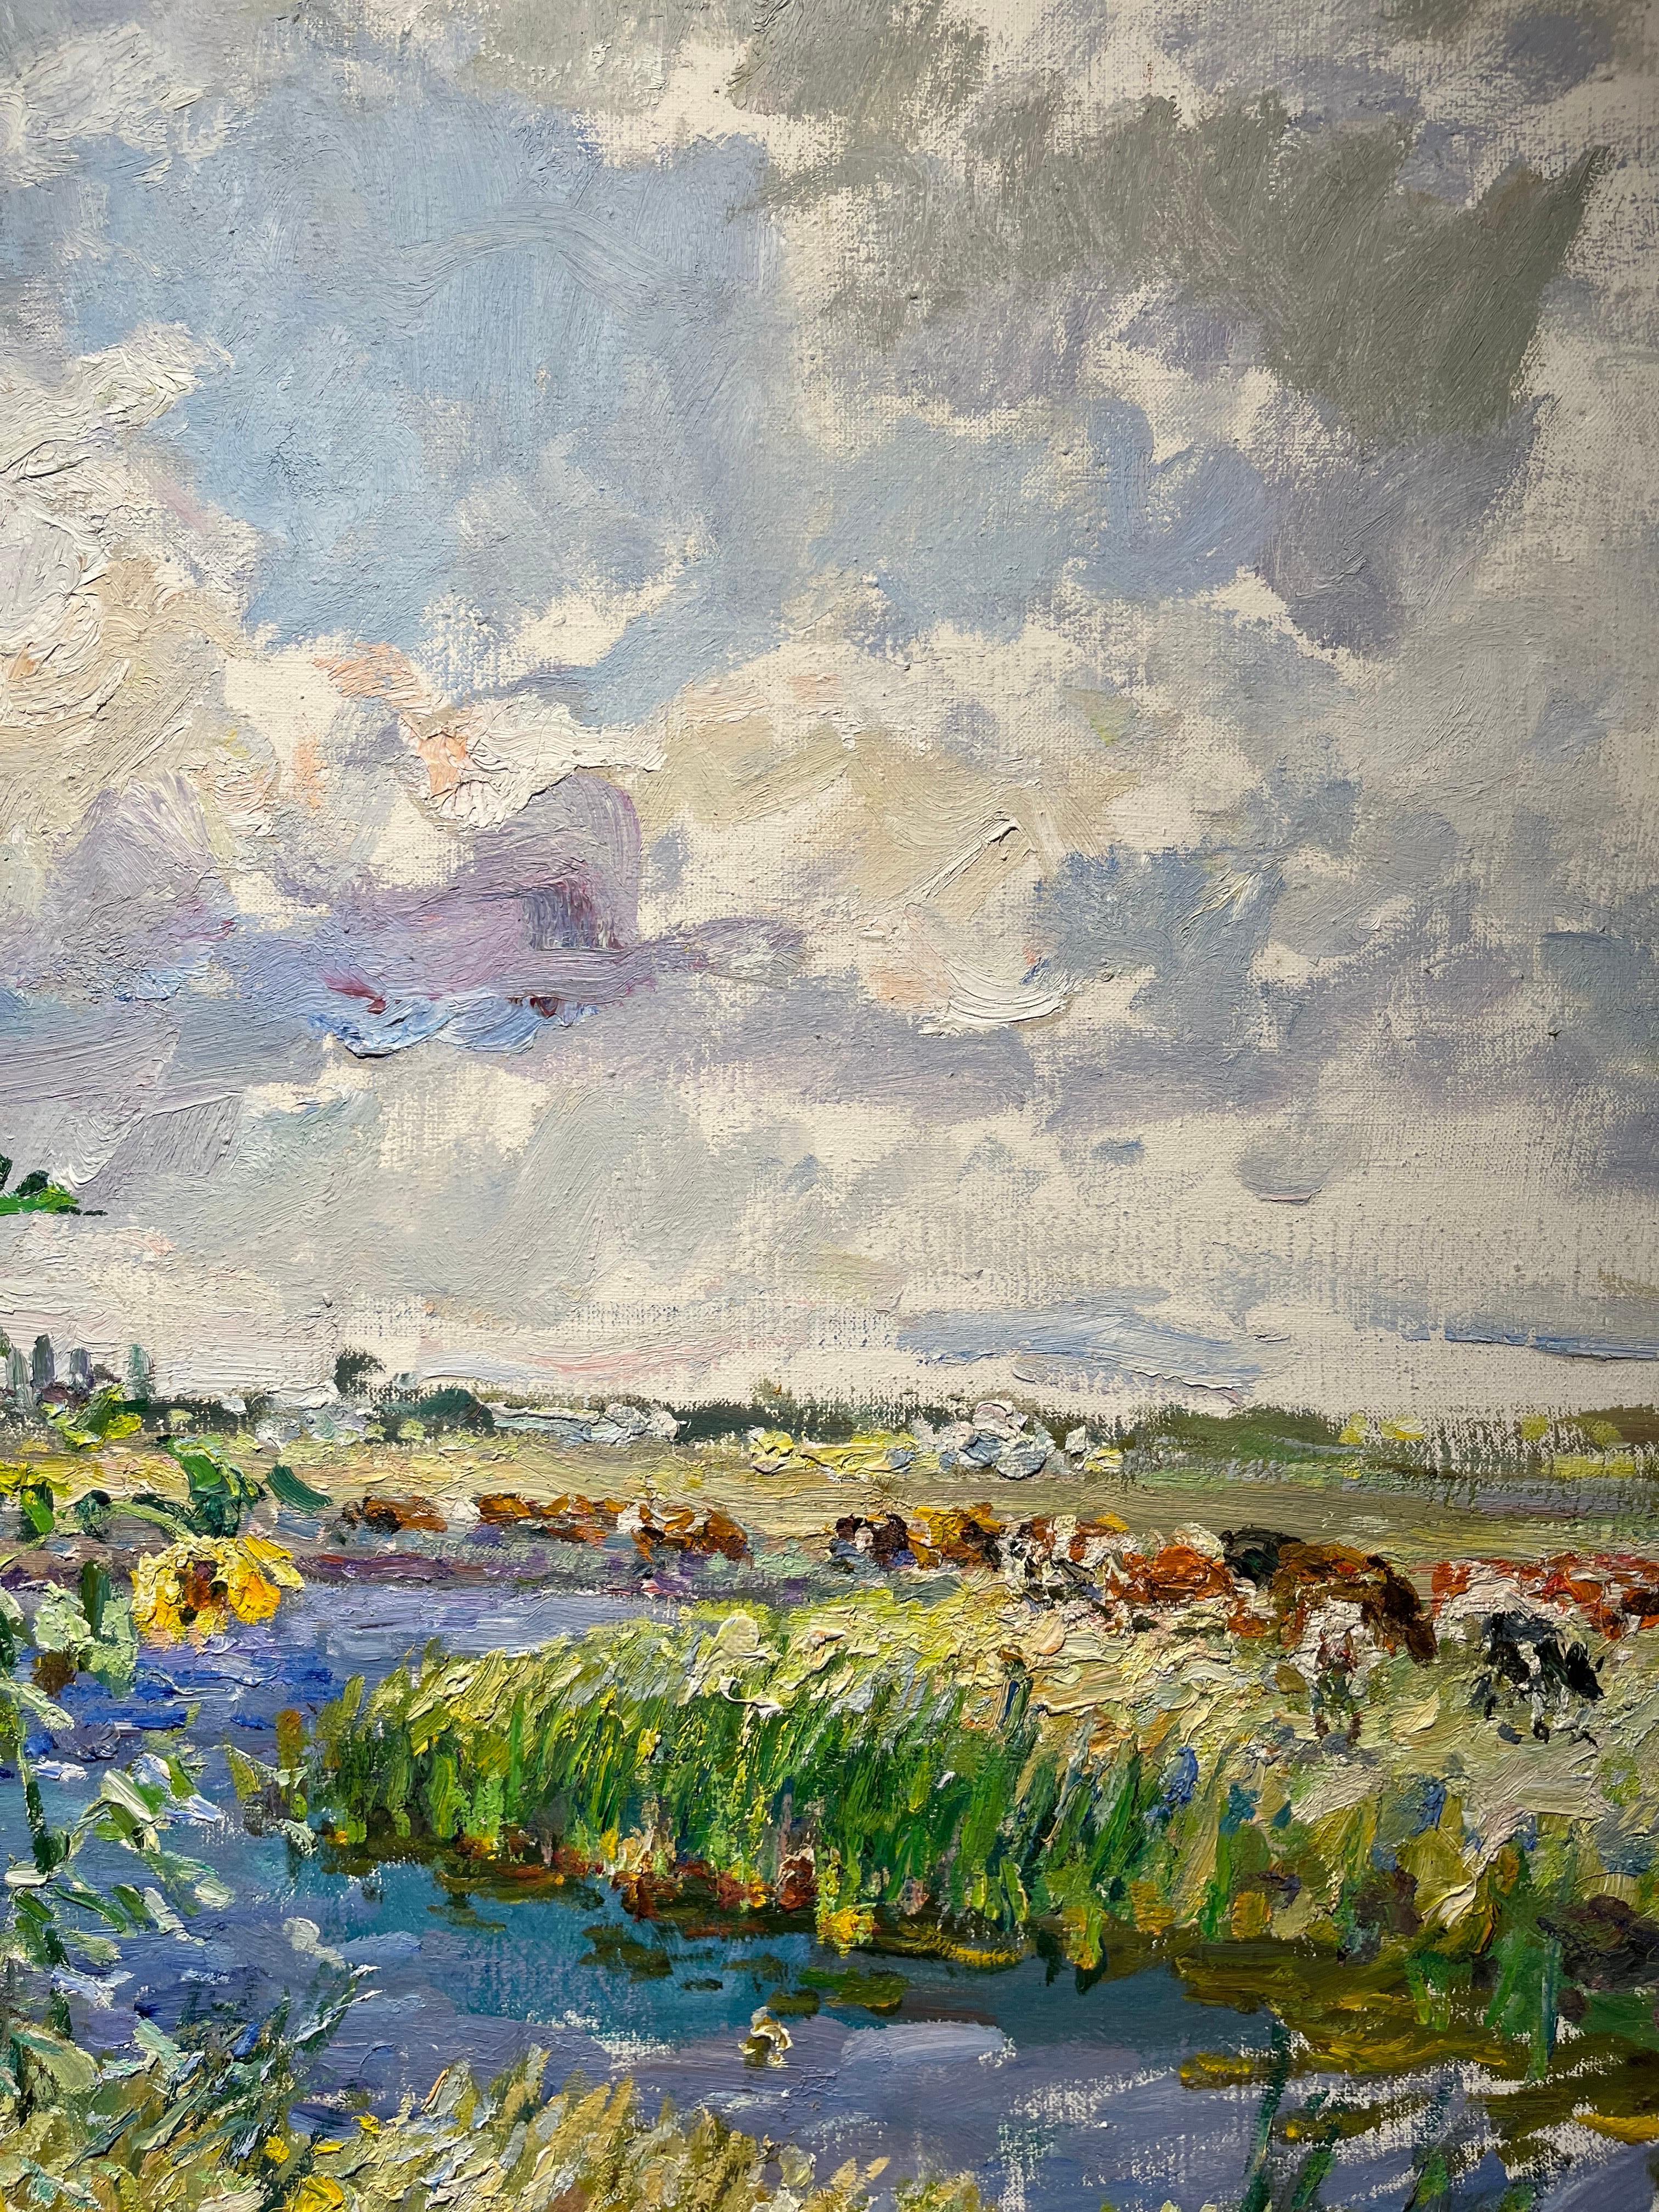 Sunflowers, Countryside, River, Yellow, Sky, Clouds, Ukraine

Georgij MOROZ (Dneprodzerzinsk, Ukraine, 1937 - St. Petersburg, 2015)
MUSEUMS
Moscow, Tret’jakov Gallery
Moscow, USSR Artists Collection
Moscow, The Ministry of Culture Collection
St.